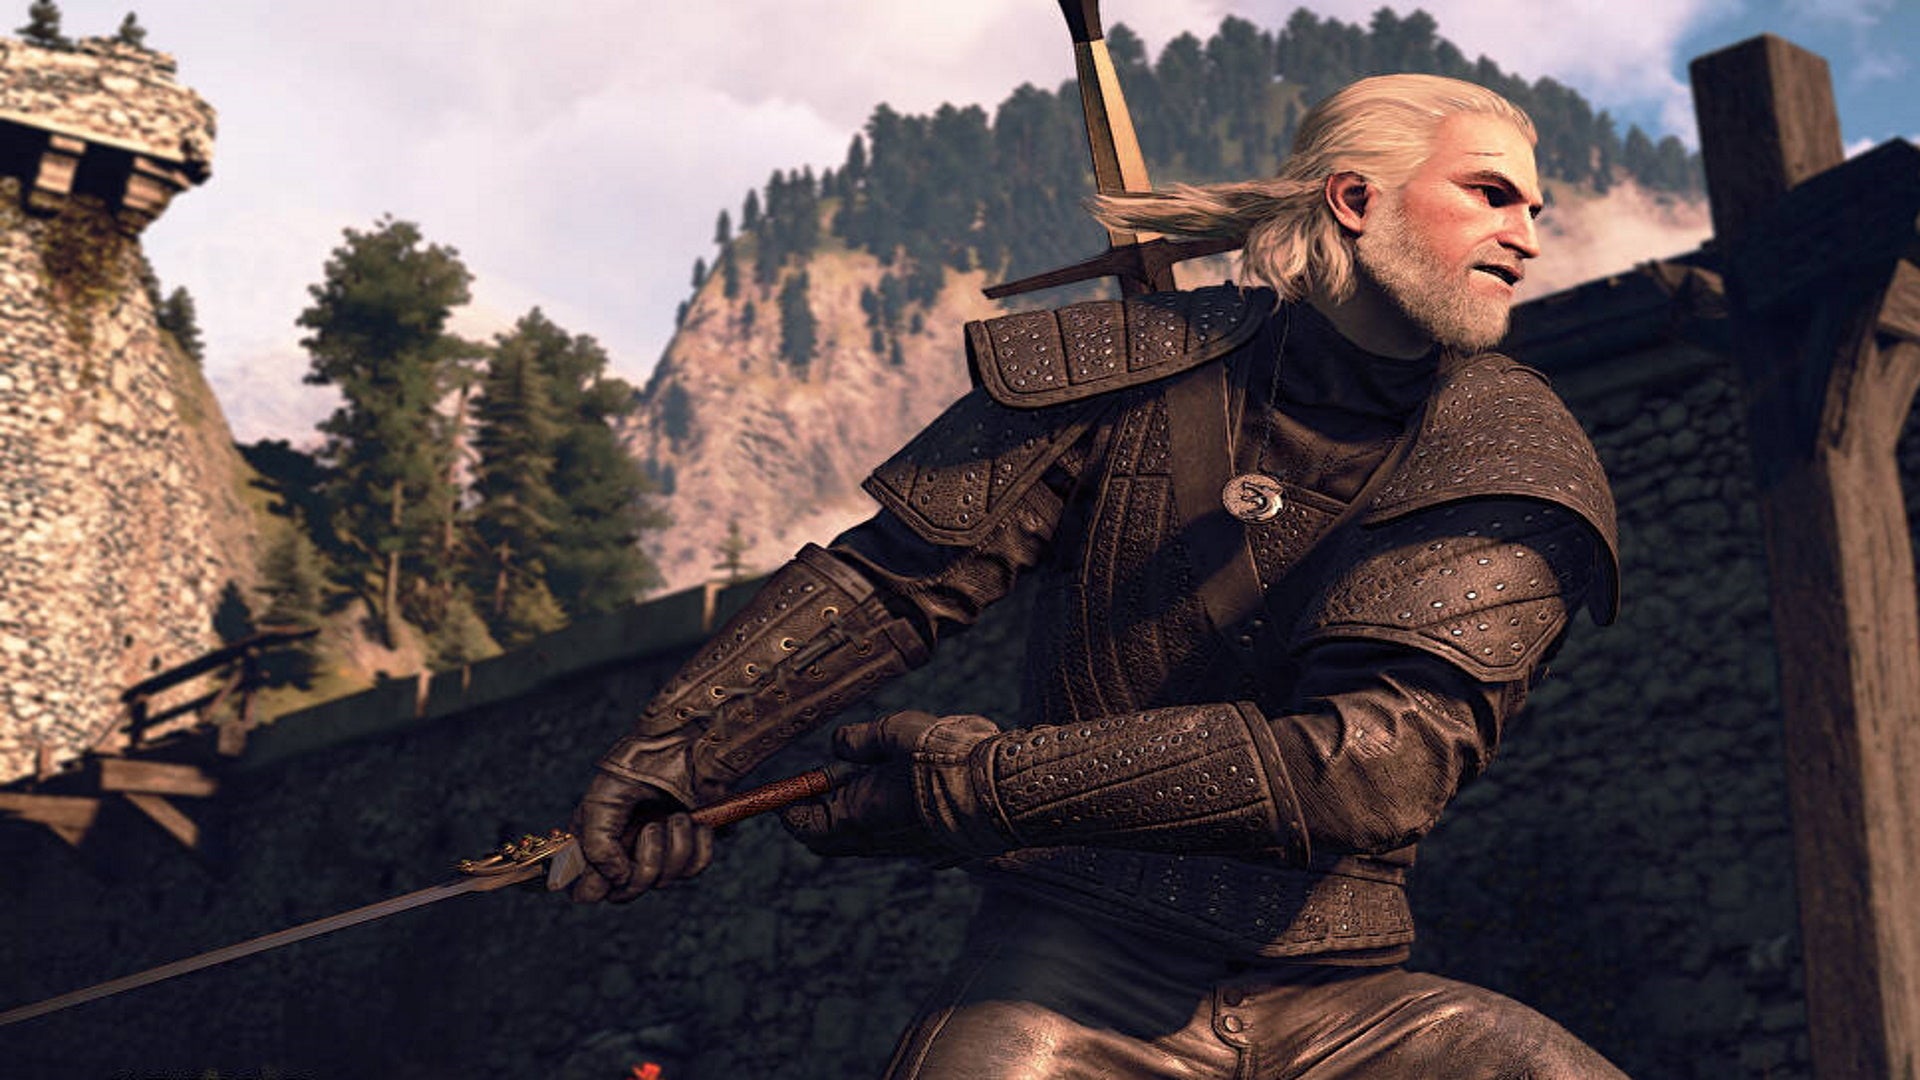 The Witcher 3 saddlebags: A man with black armor and white hair stands in front of a stone house in an action pose. He's holding a sword behind him, preparing to swing